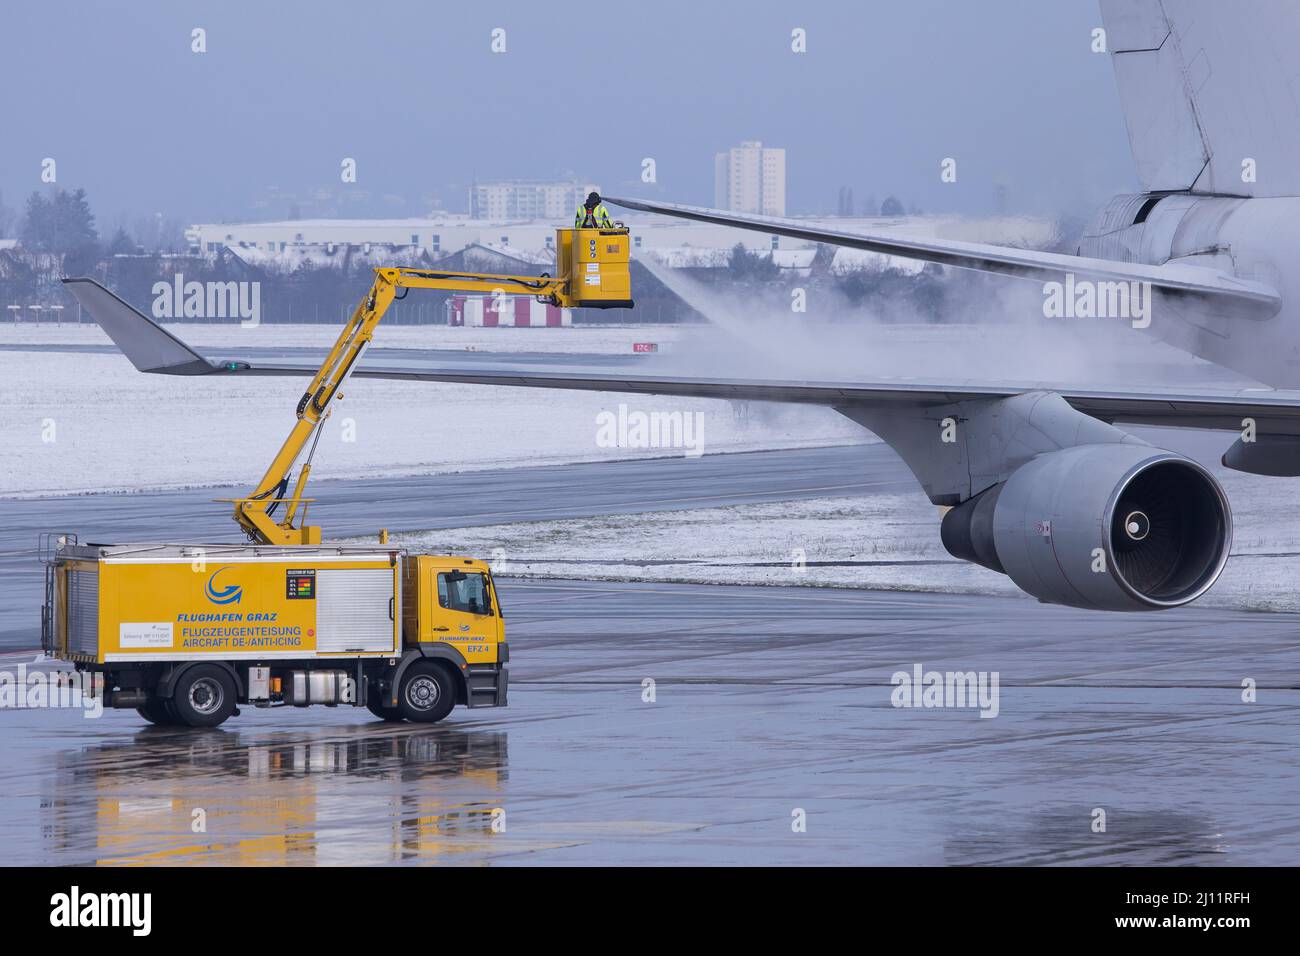 Anti-icing in progress at a Boeing 747 at airport Graz in Austria during cold weather conditions Stock Photo